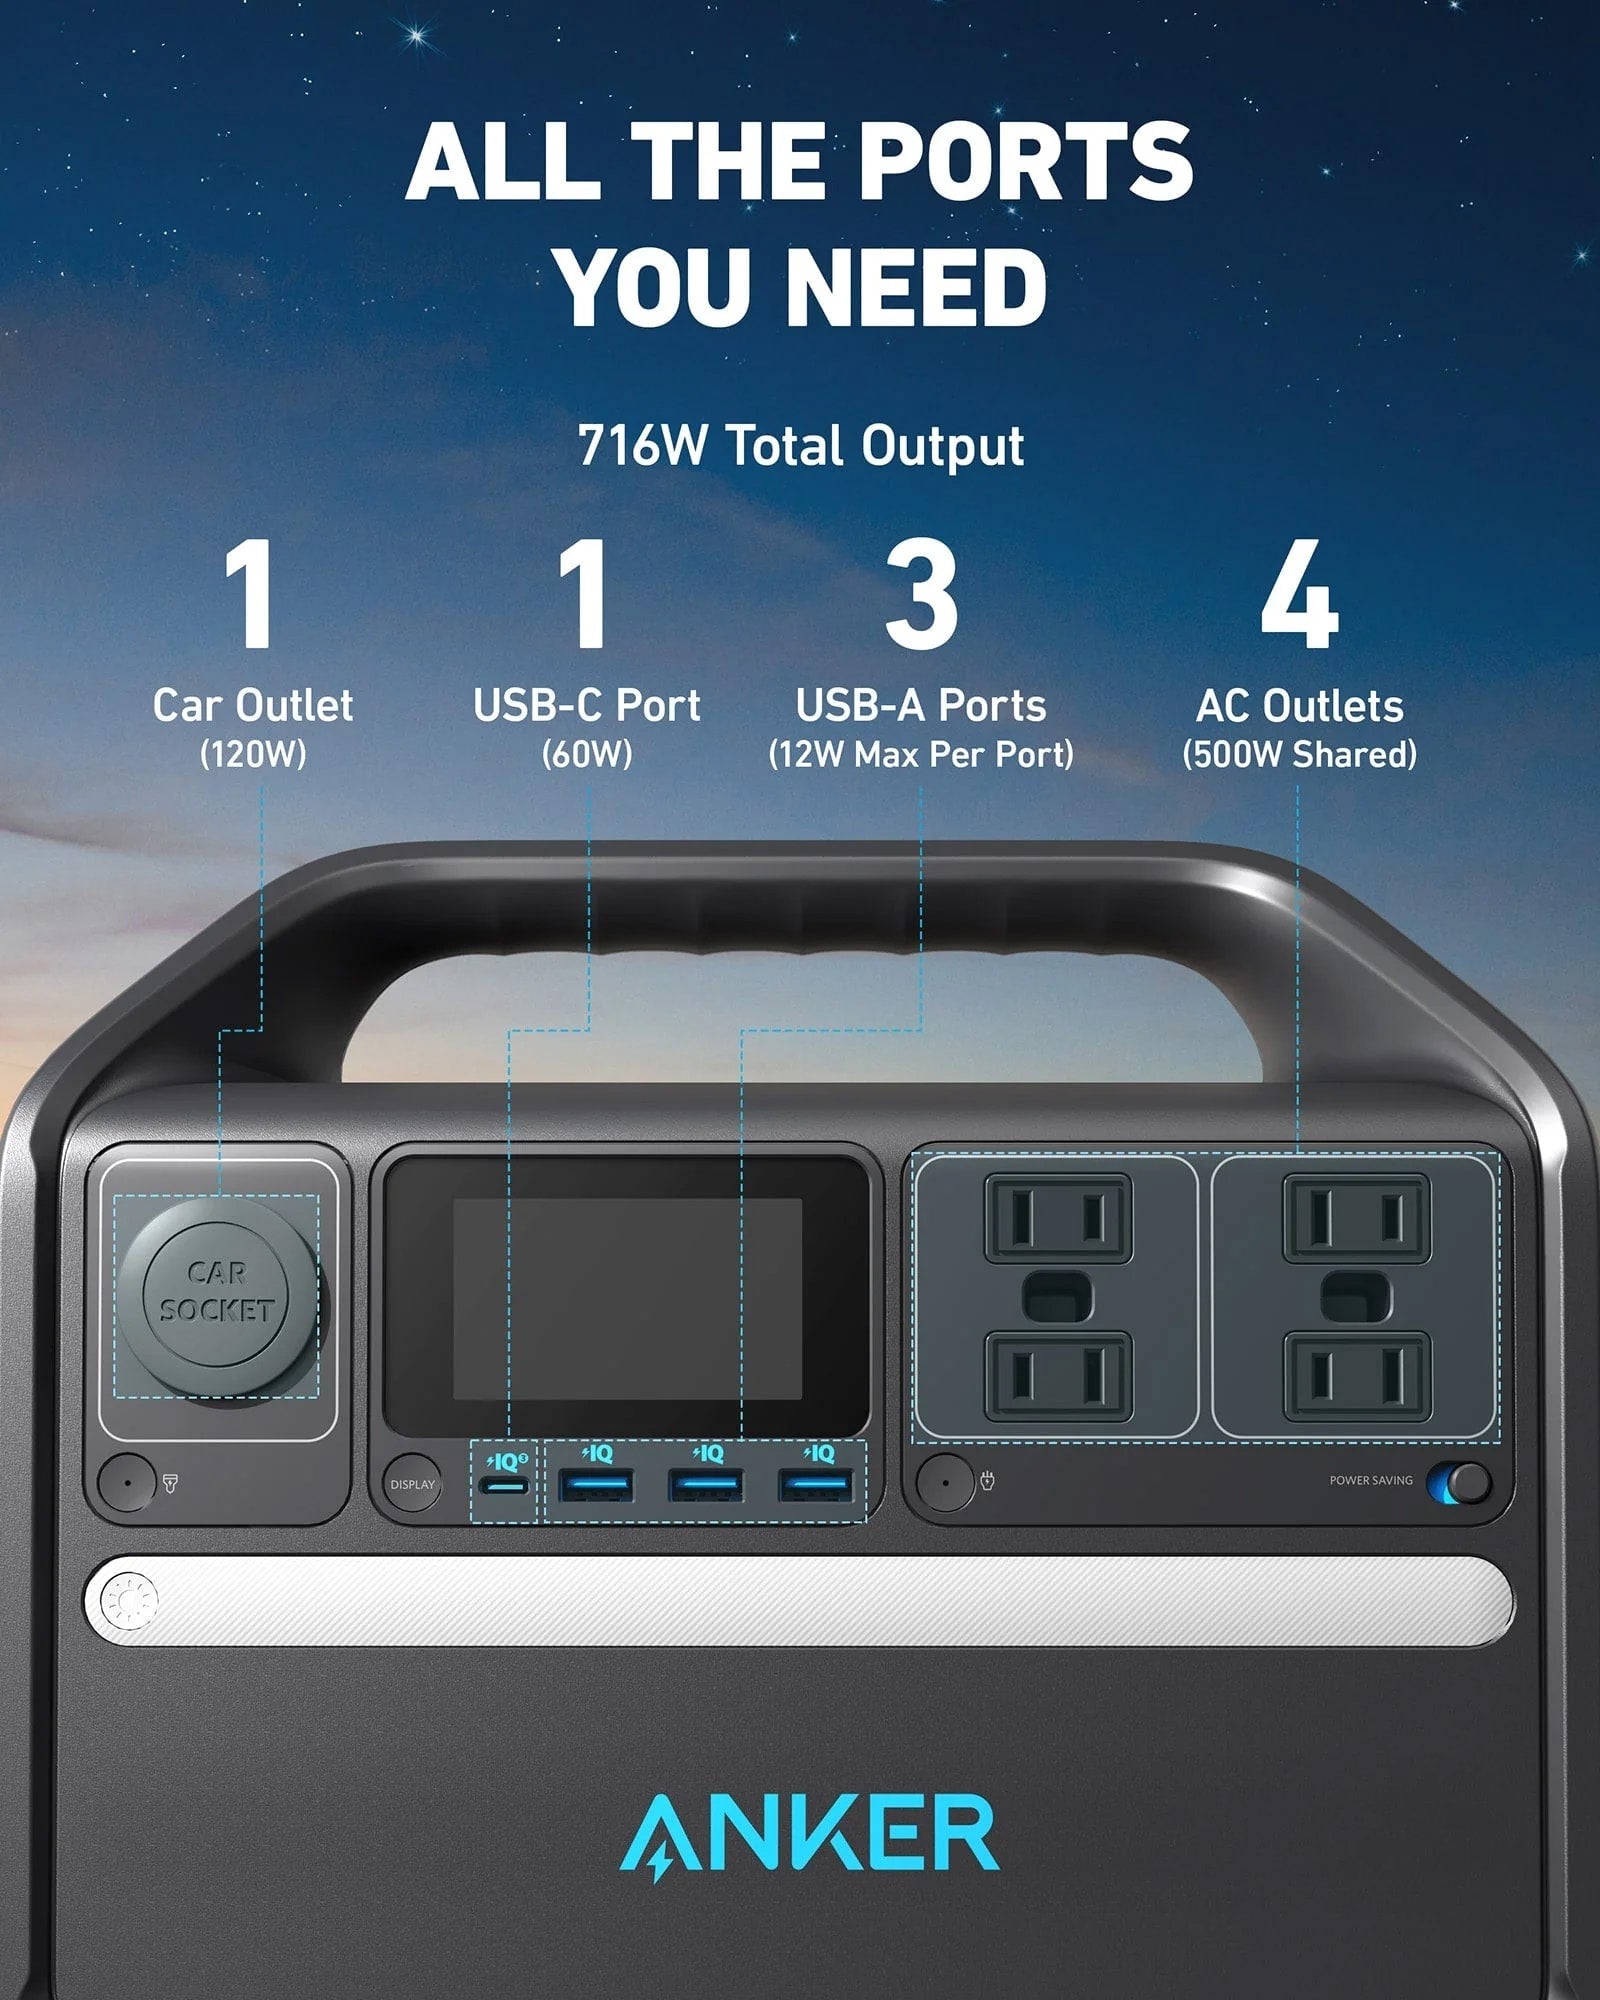 The Anker Solar Generator 535 Has All The Ports You Need - 4 AC Outlets, 3 USB-A Ports, 1 USB-C Port, and 1 Car Outlet